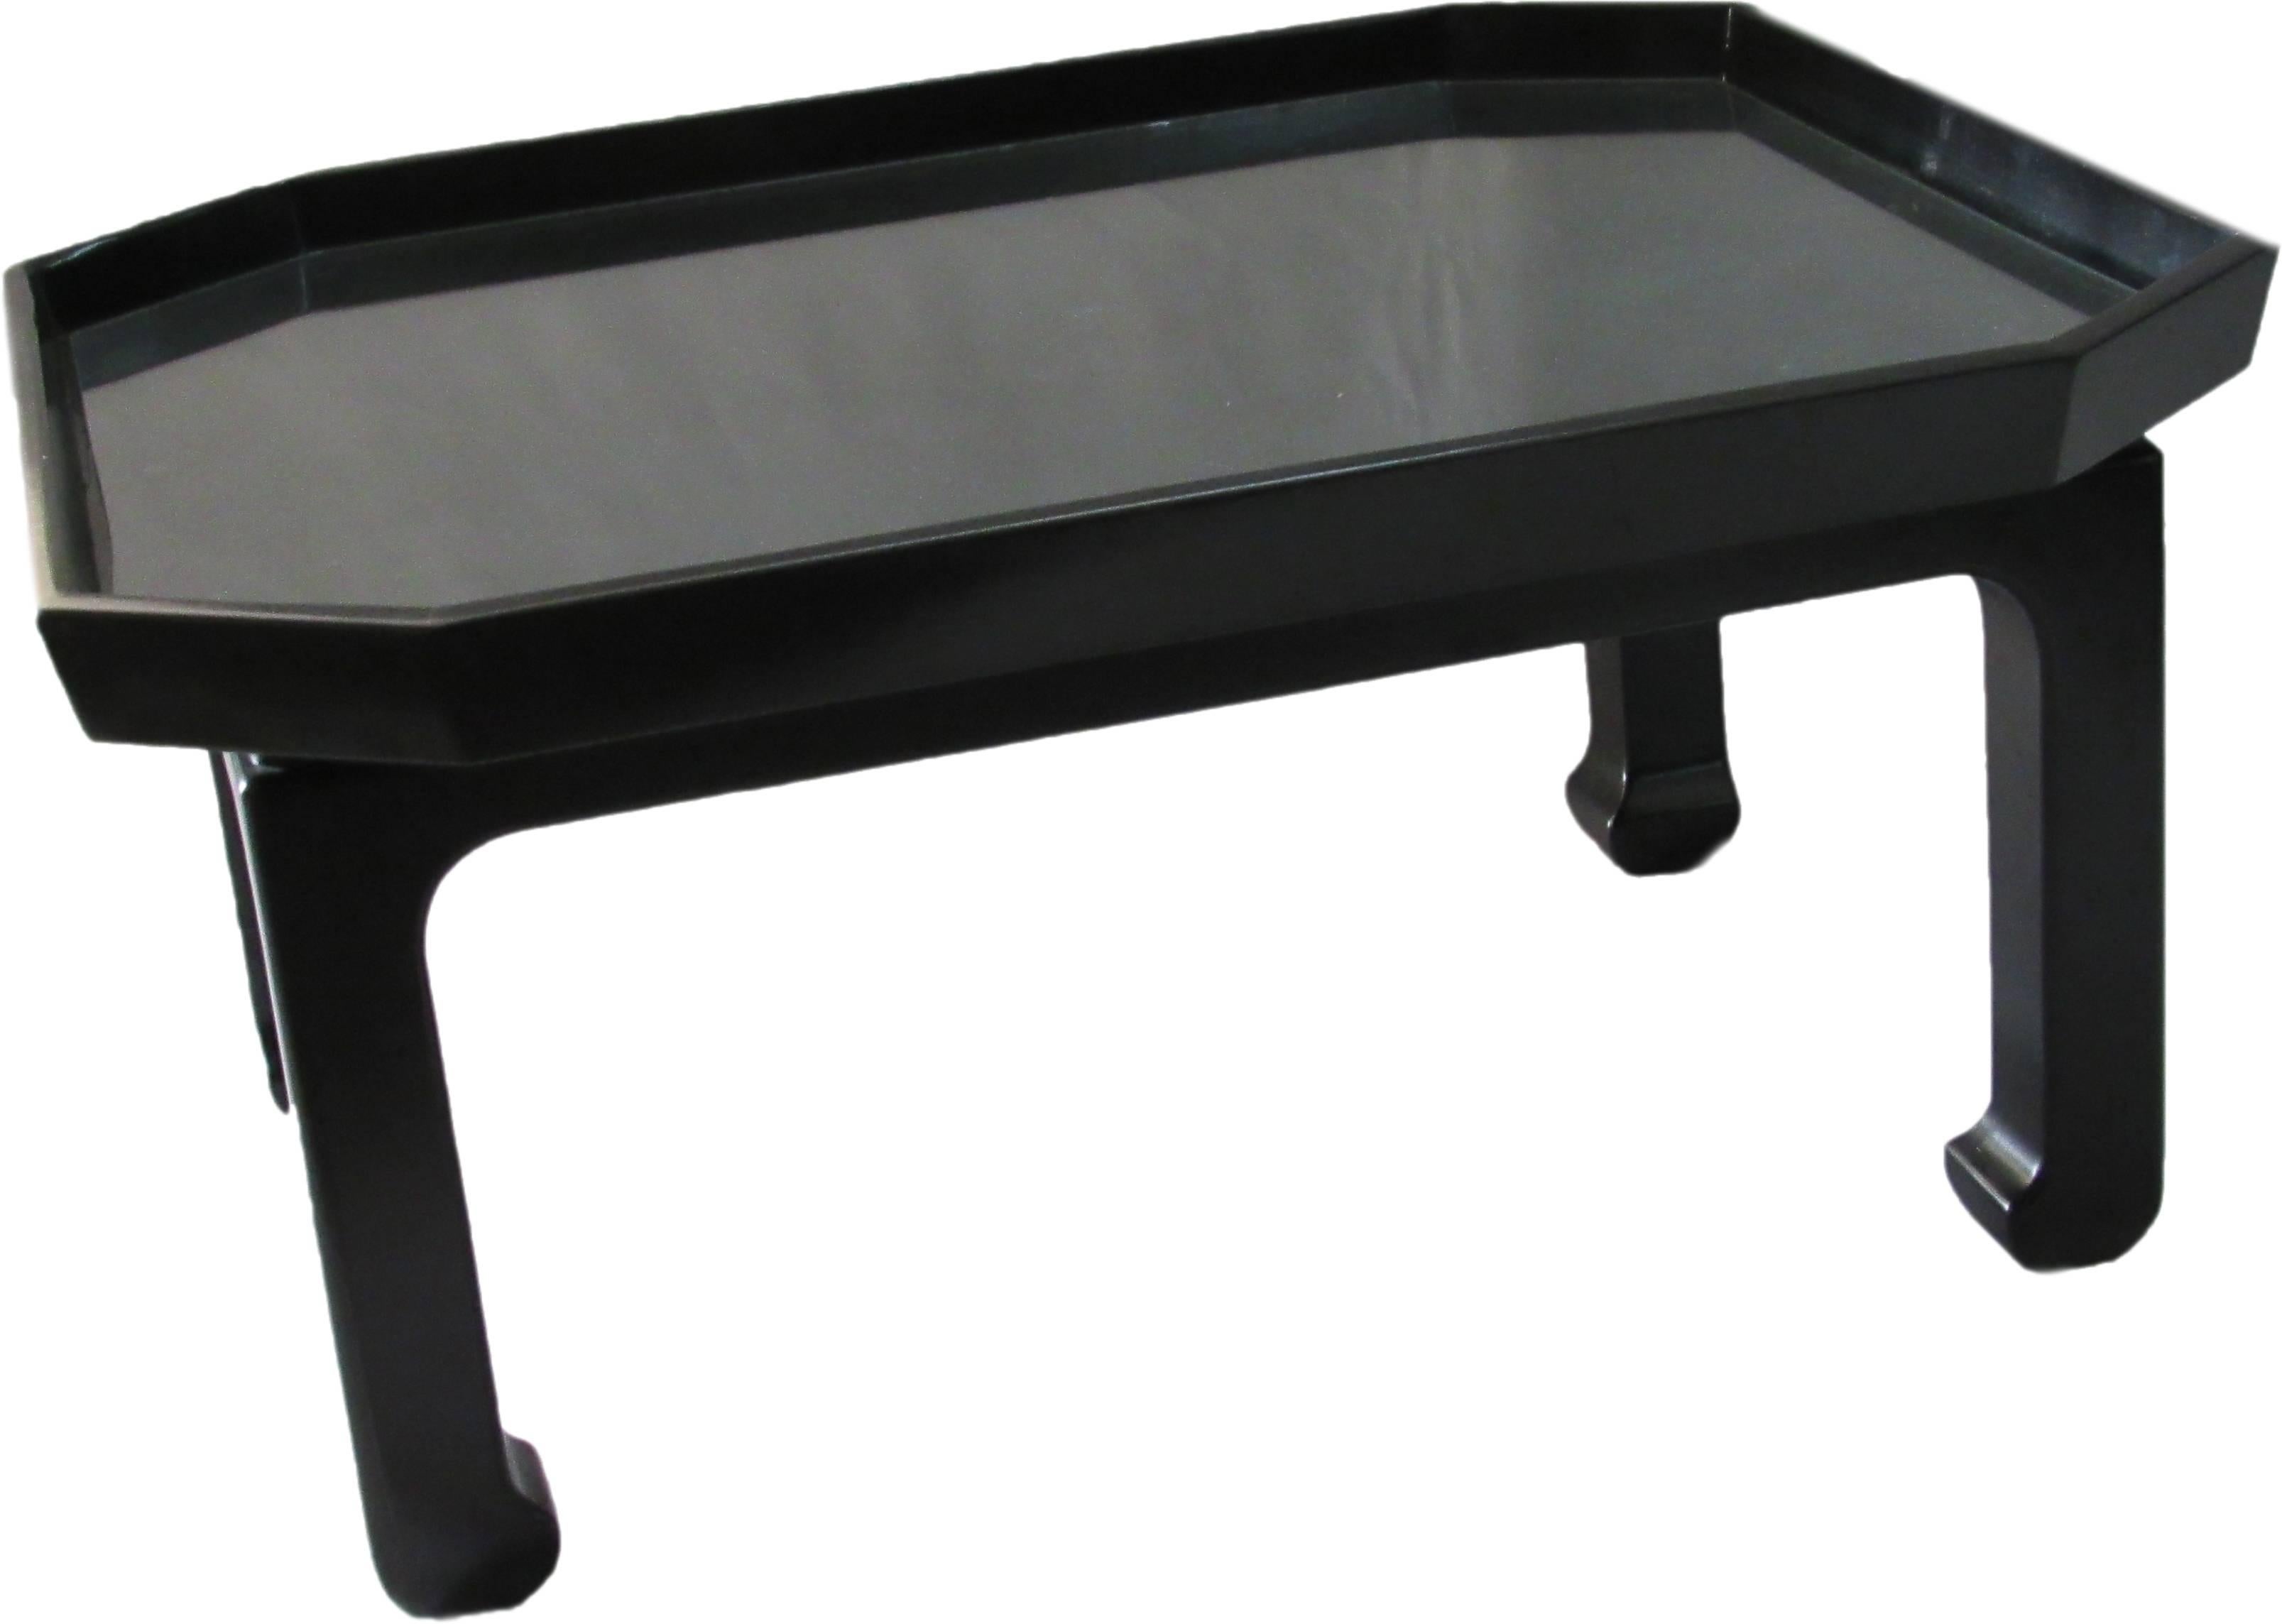 Peter marino black lacquer coffee table.